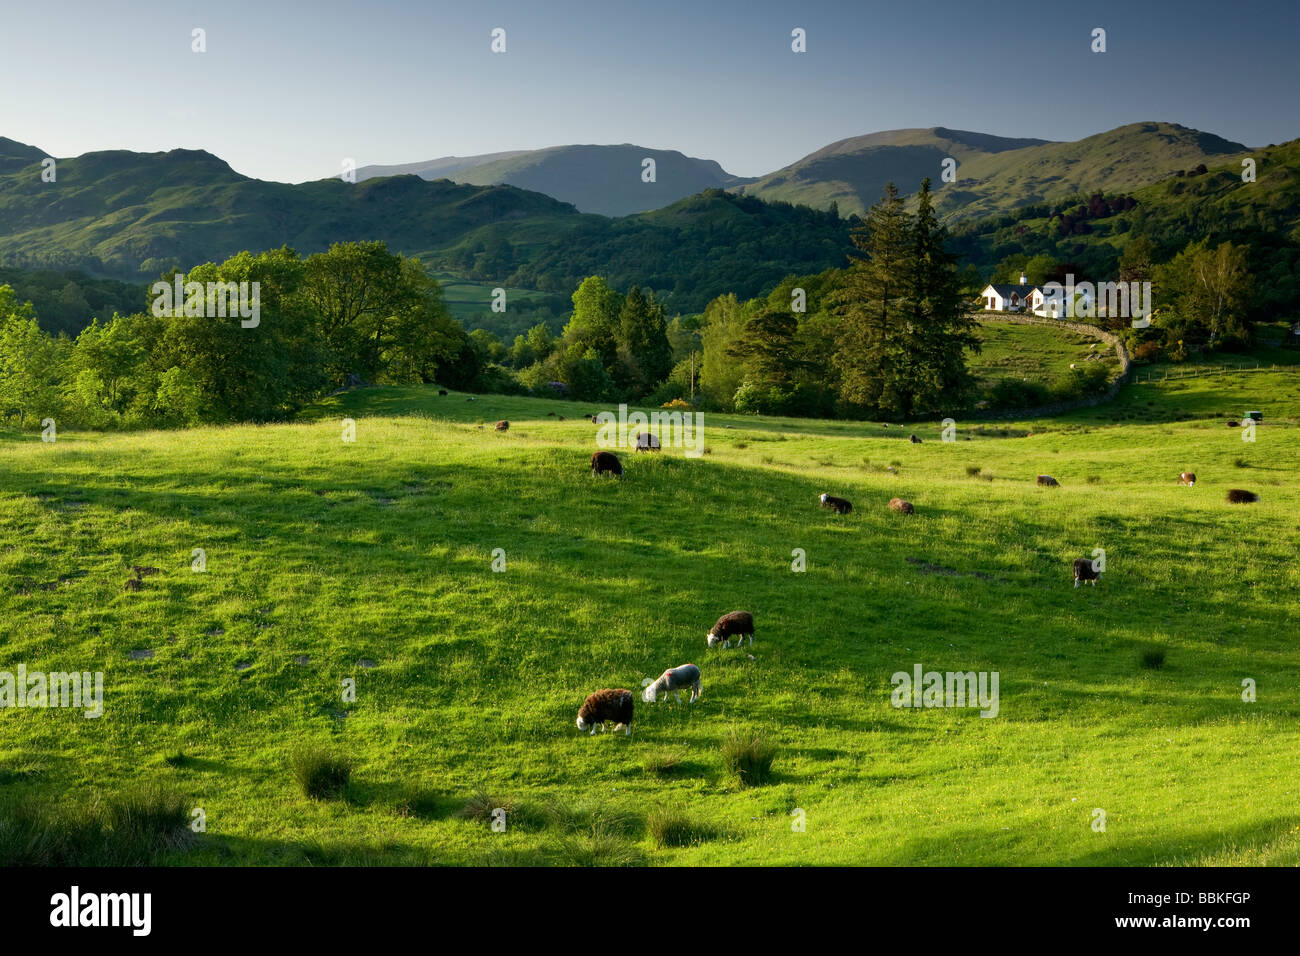 Looking towards the Langdale Hills from near Skelwith Bridge with sheep grazing in a field Stock Photo